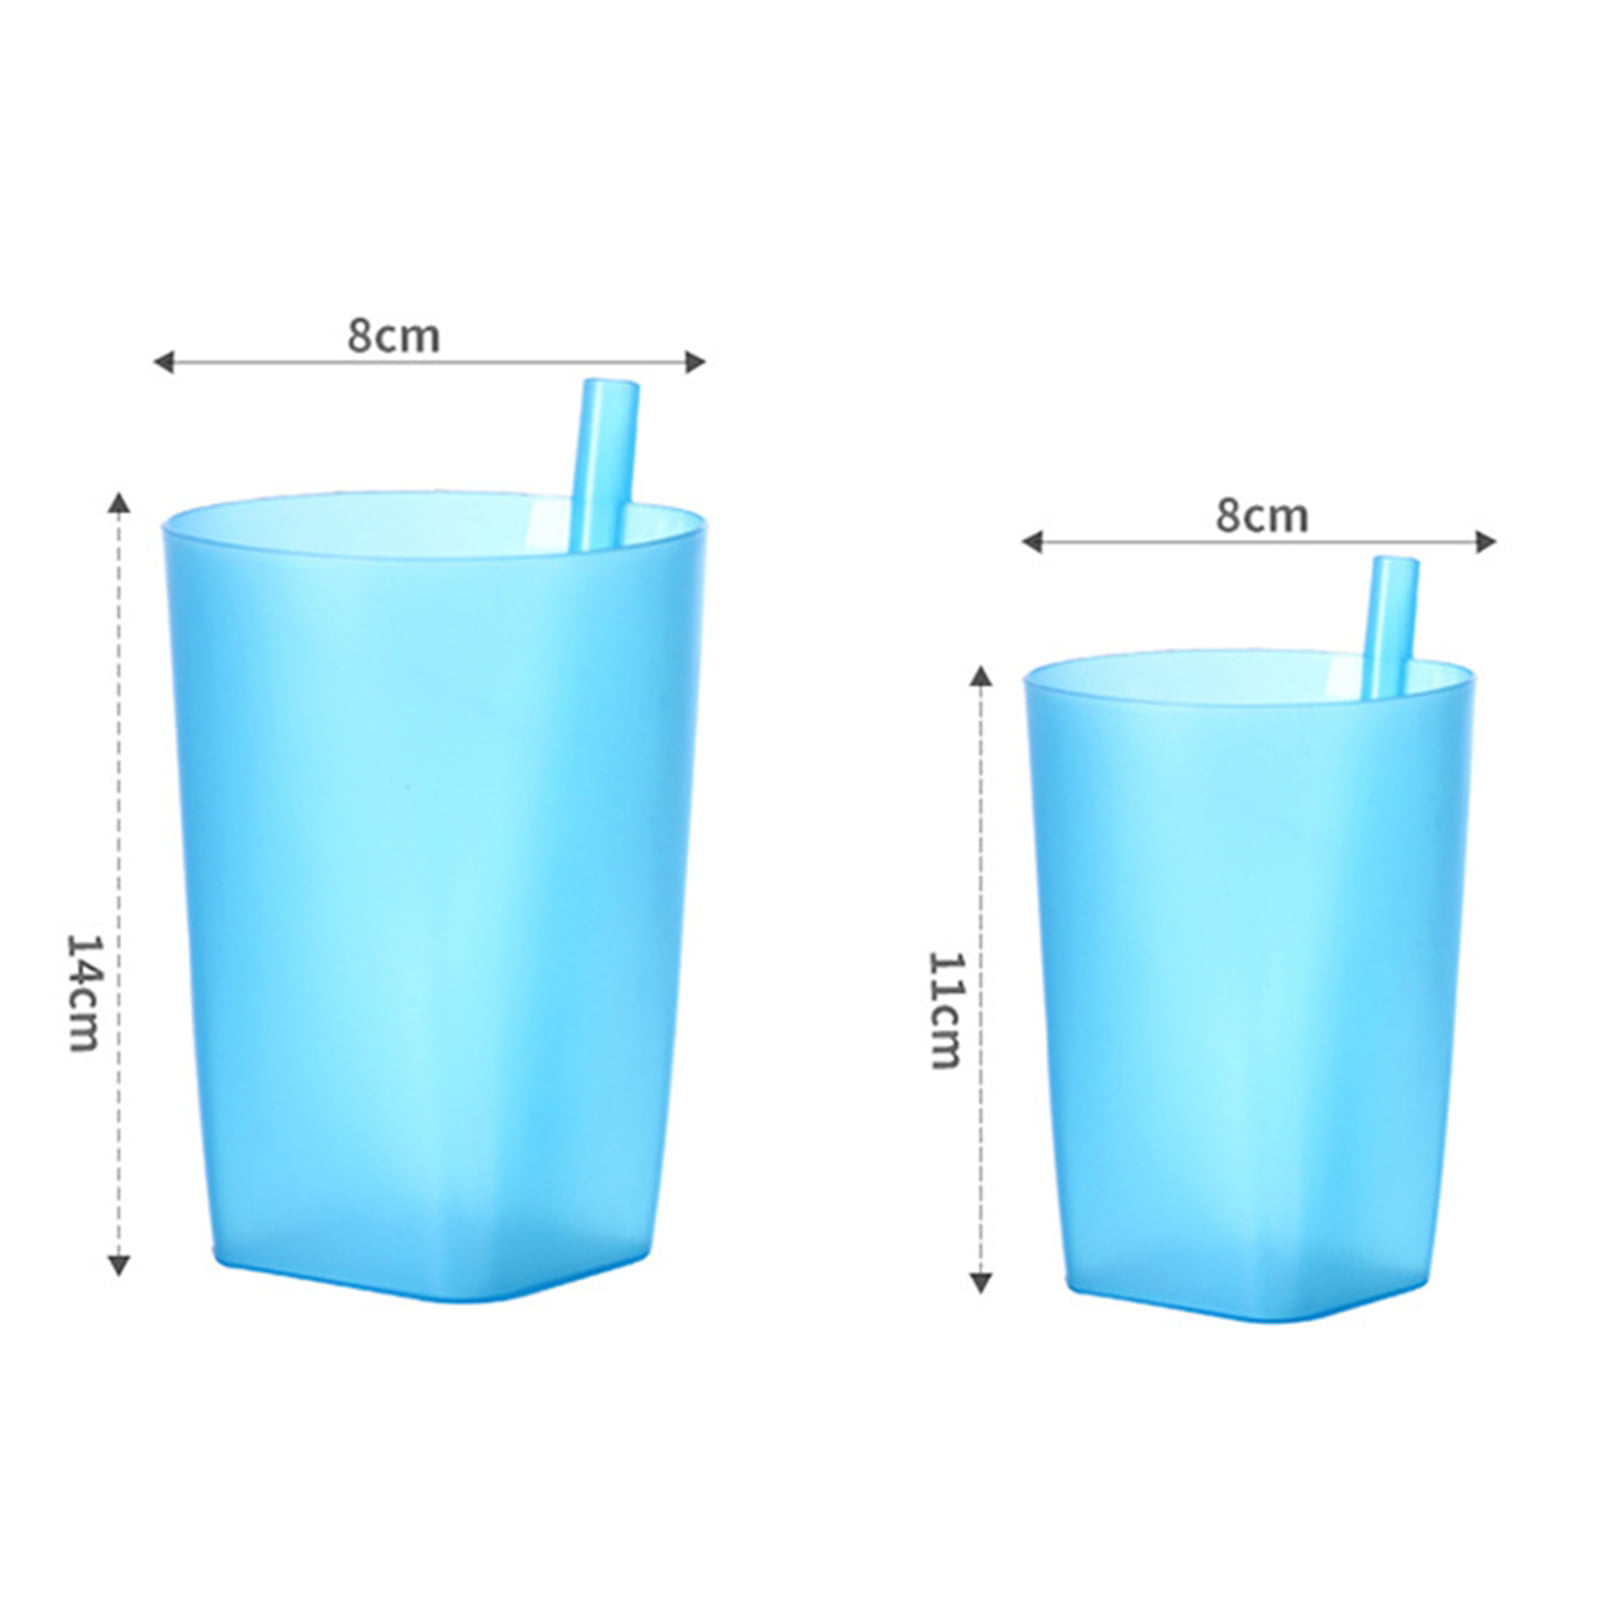 Plastic Straw Cup Kids Colorful Mug With Built In Straw Summer Juice Water Cup  Kids Candy Color Plastic Straw Cups From Esw_house, $0.55